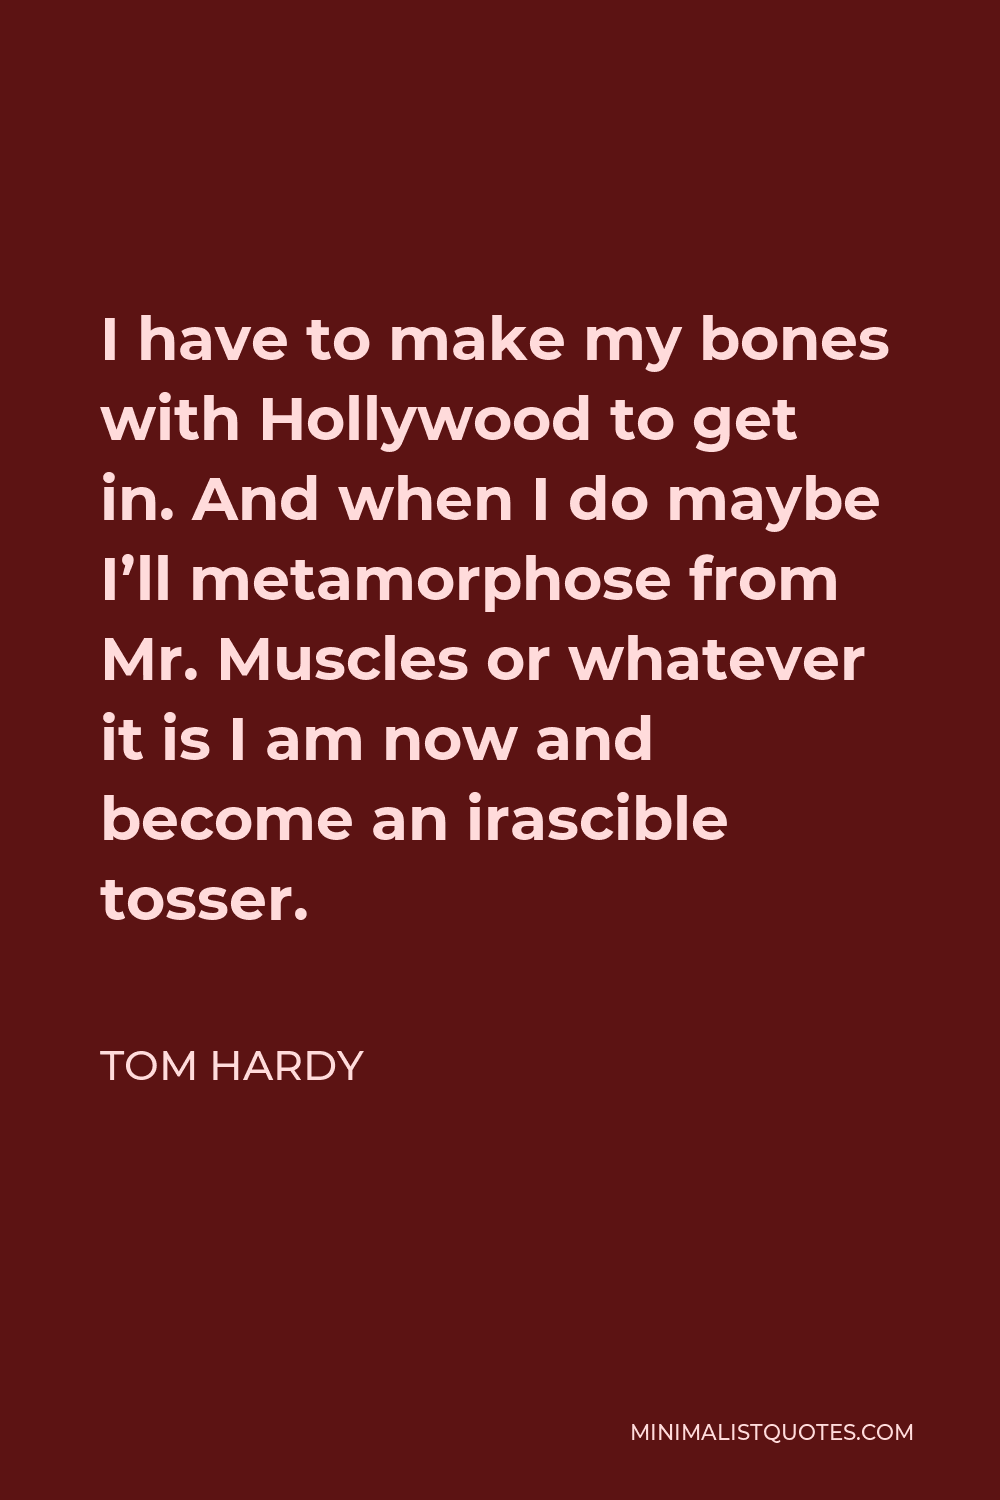 Tom Hardy Quote - I have to make my bones with Hollywood to get in. And when I do maybe I’ll metamorphose from Mr. Muscles or whatever it is I am now and become an irascible tosser.